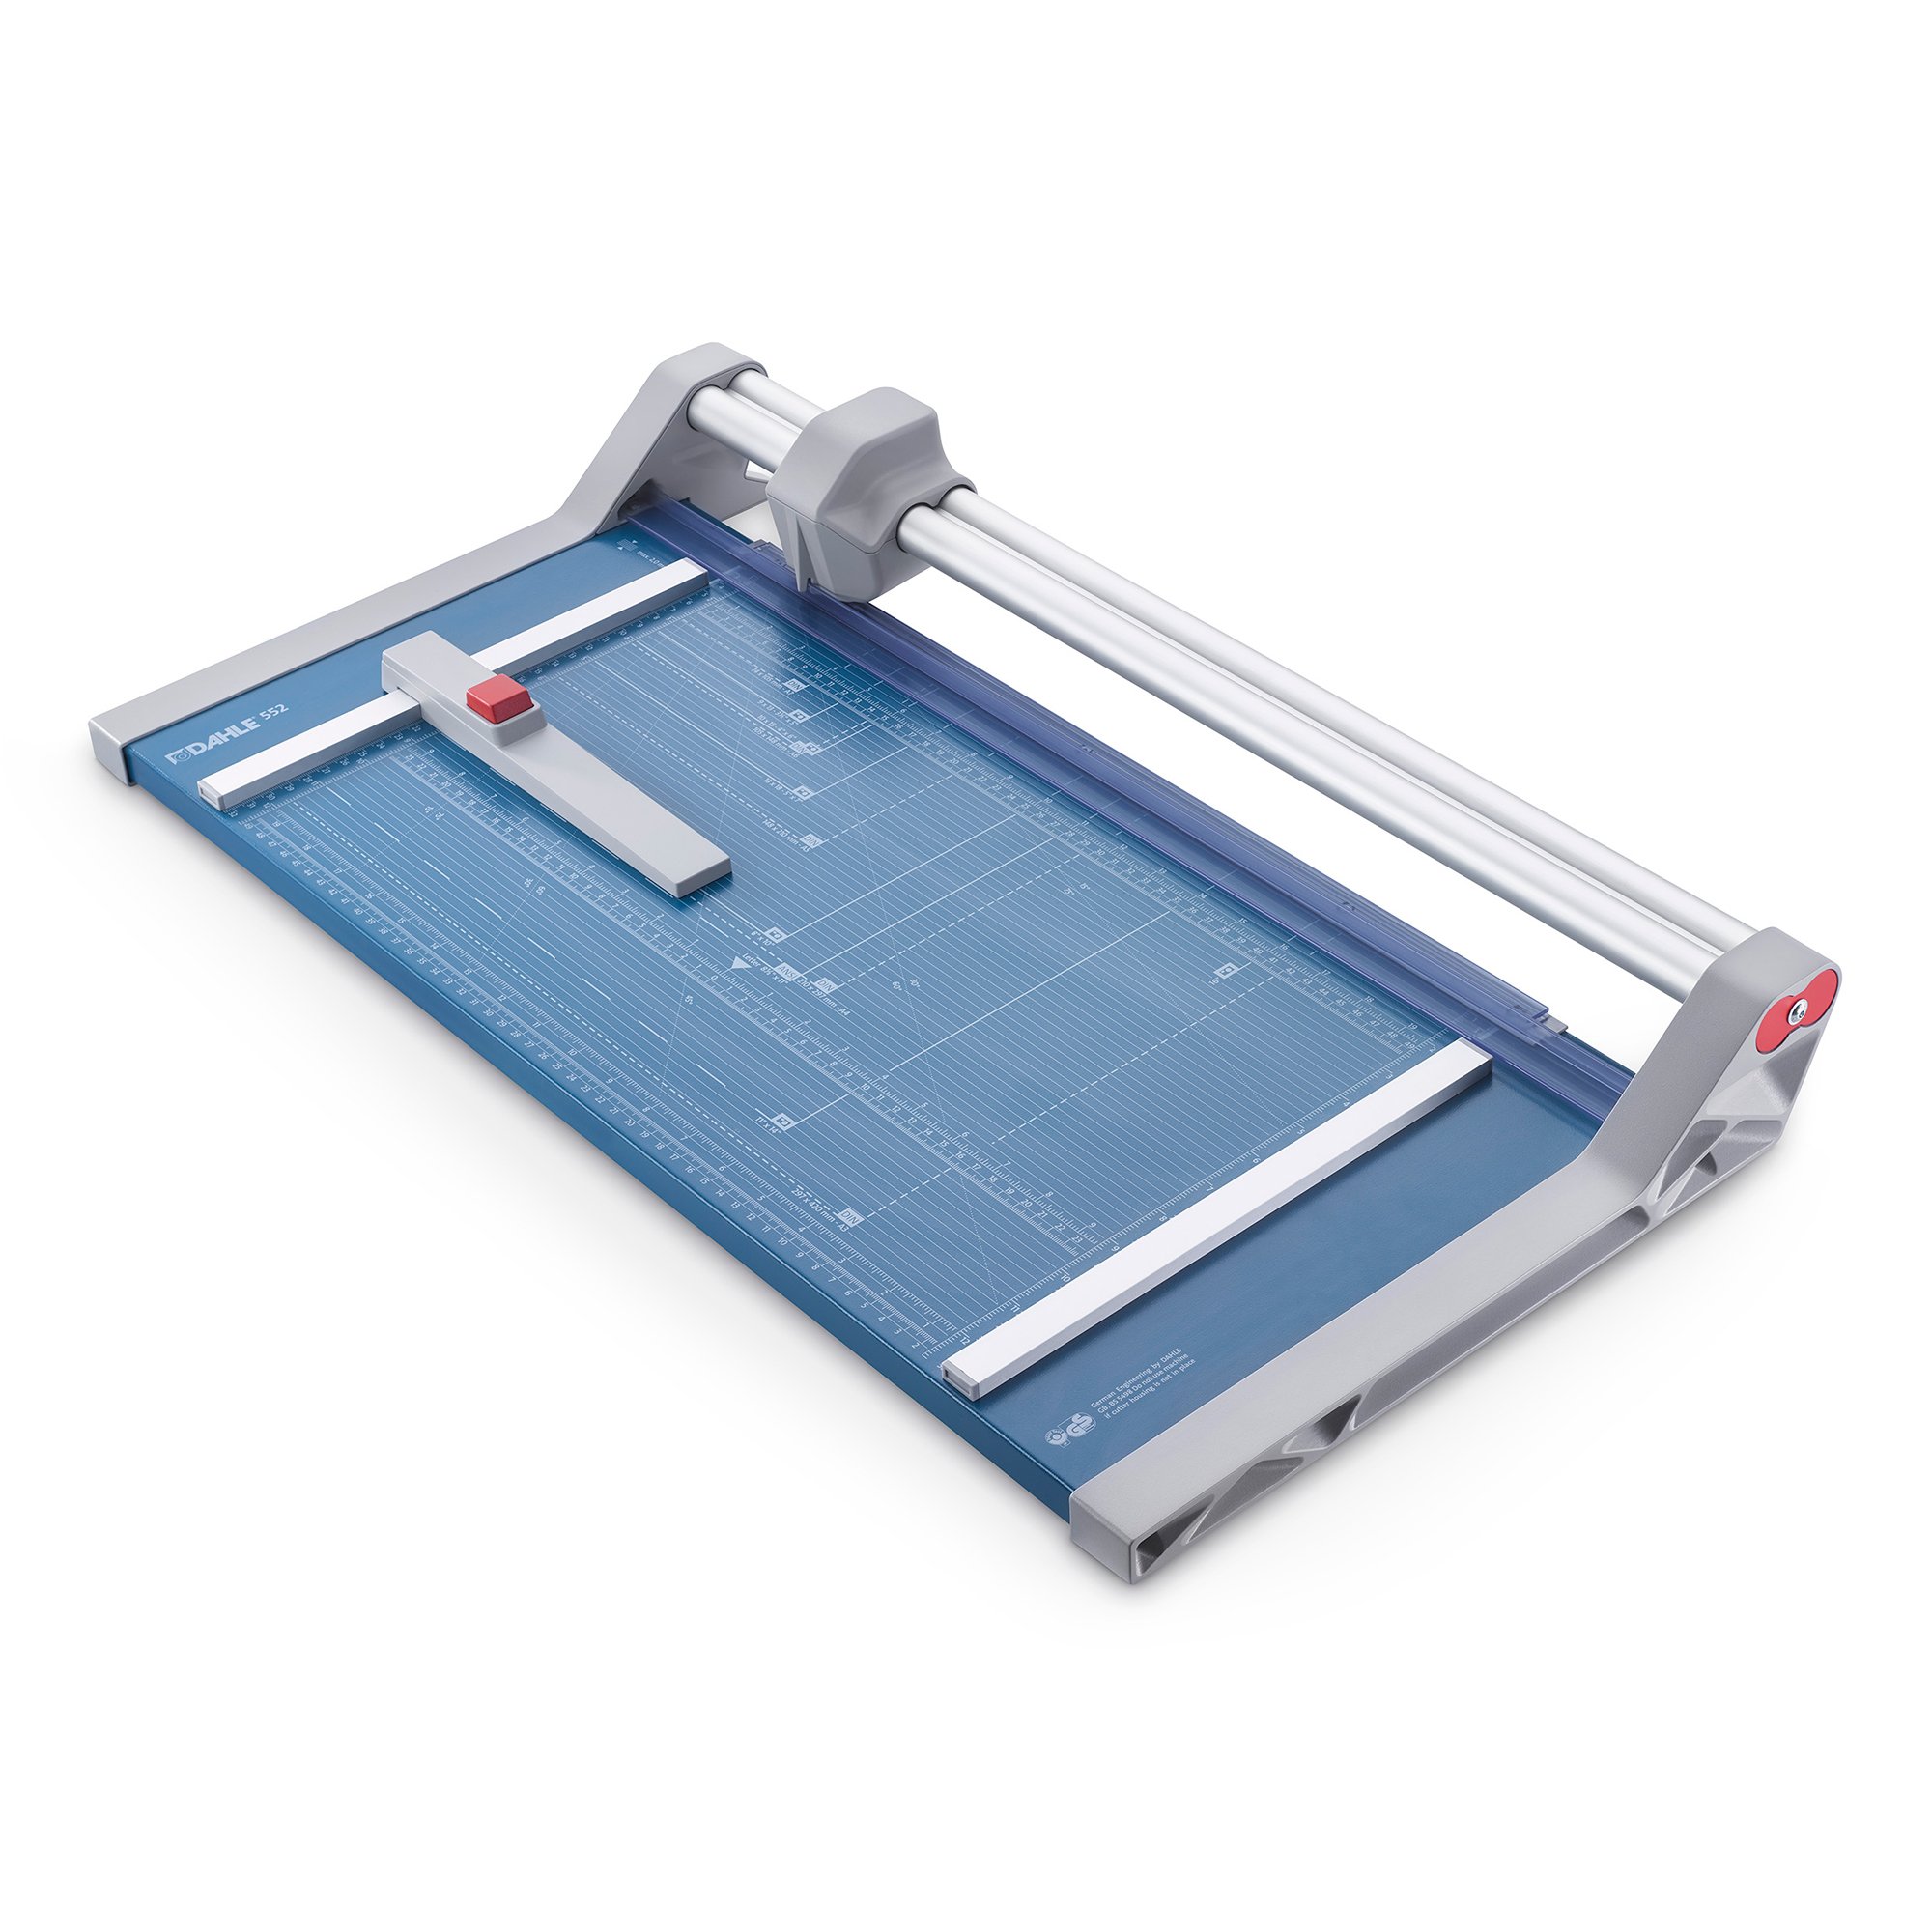 Dahle 552 A3 Professional Paper Trimmer (Gen3) - Click Image to Close